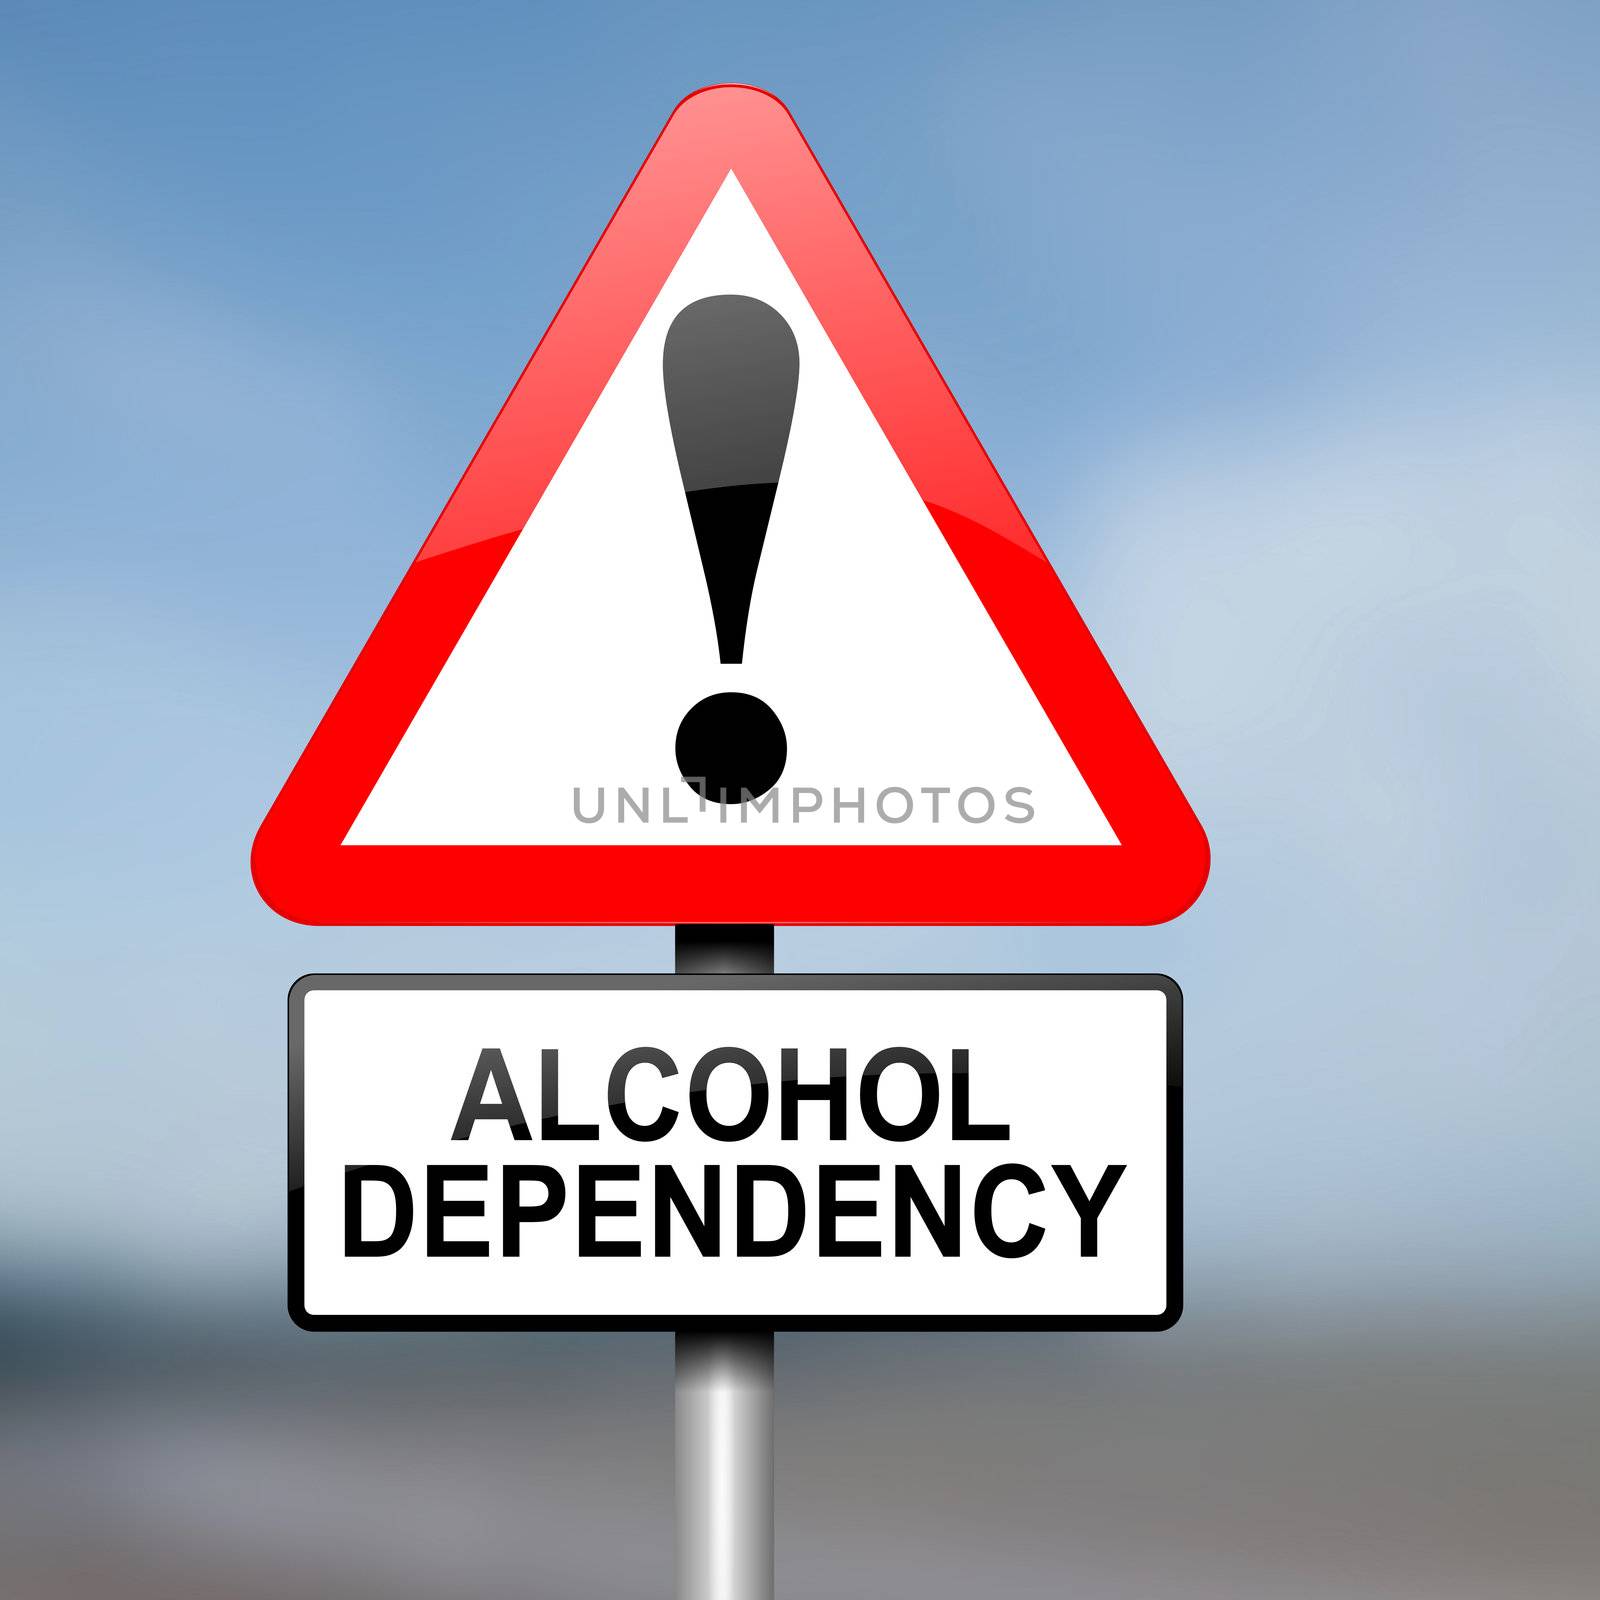 Illustration depicting red and white triangular warning road sign with a alcohol dependency concept. Blurred background.